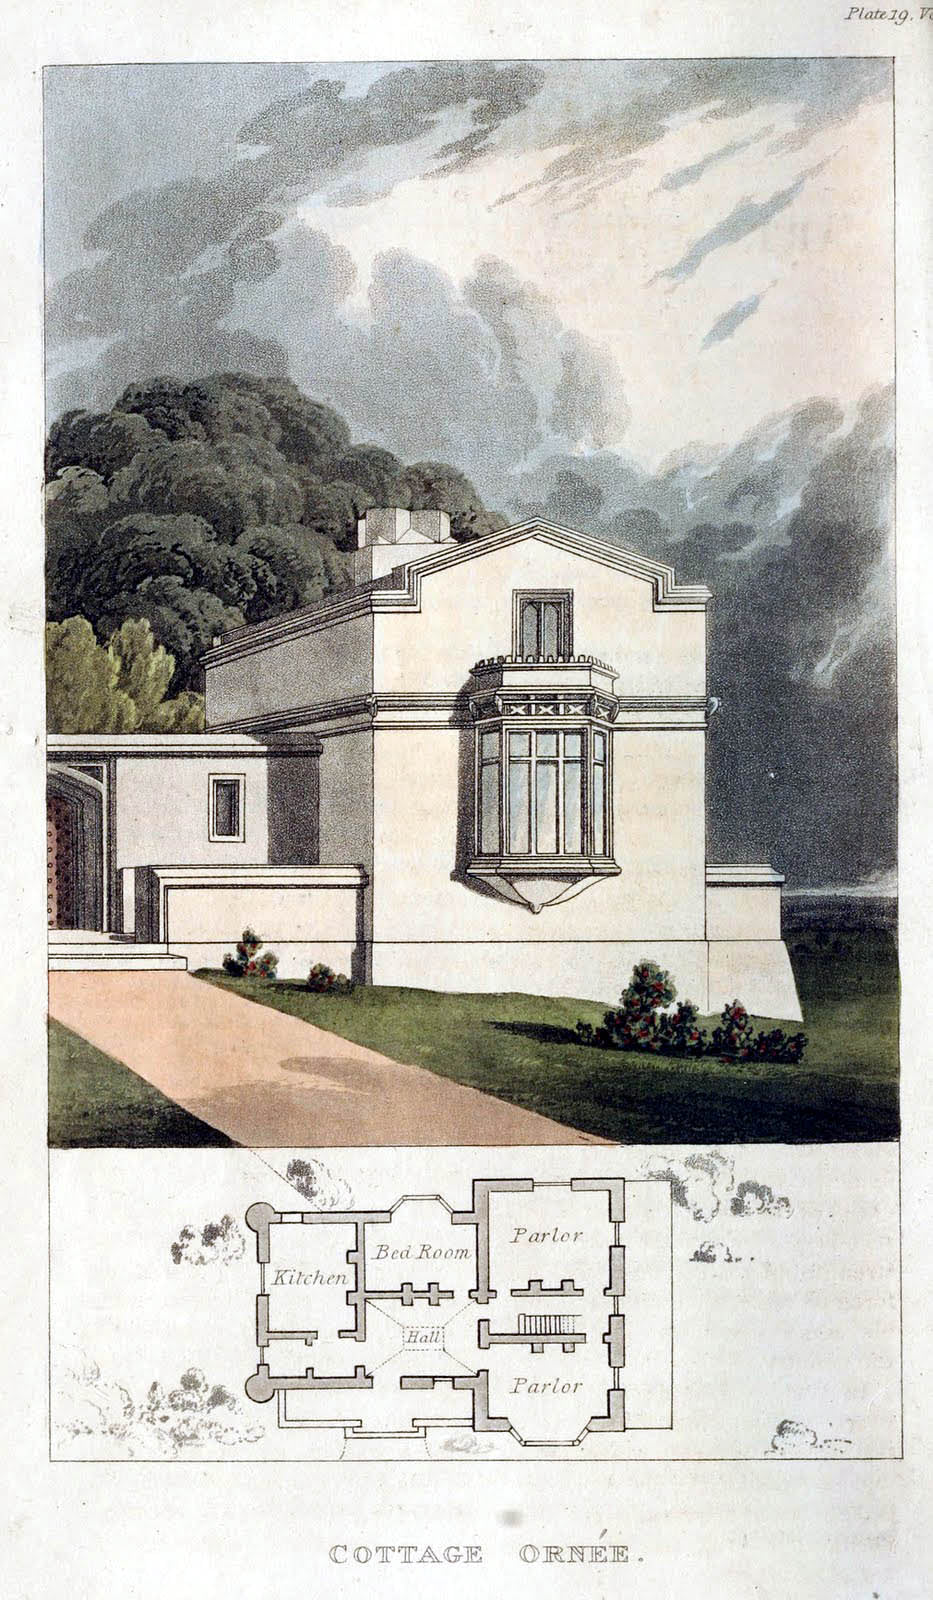 Ackermann's Repository - 1816 Cottage Ornee plate 19